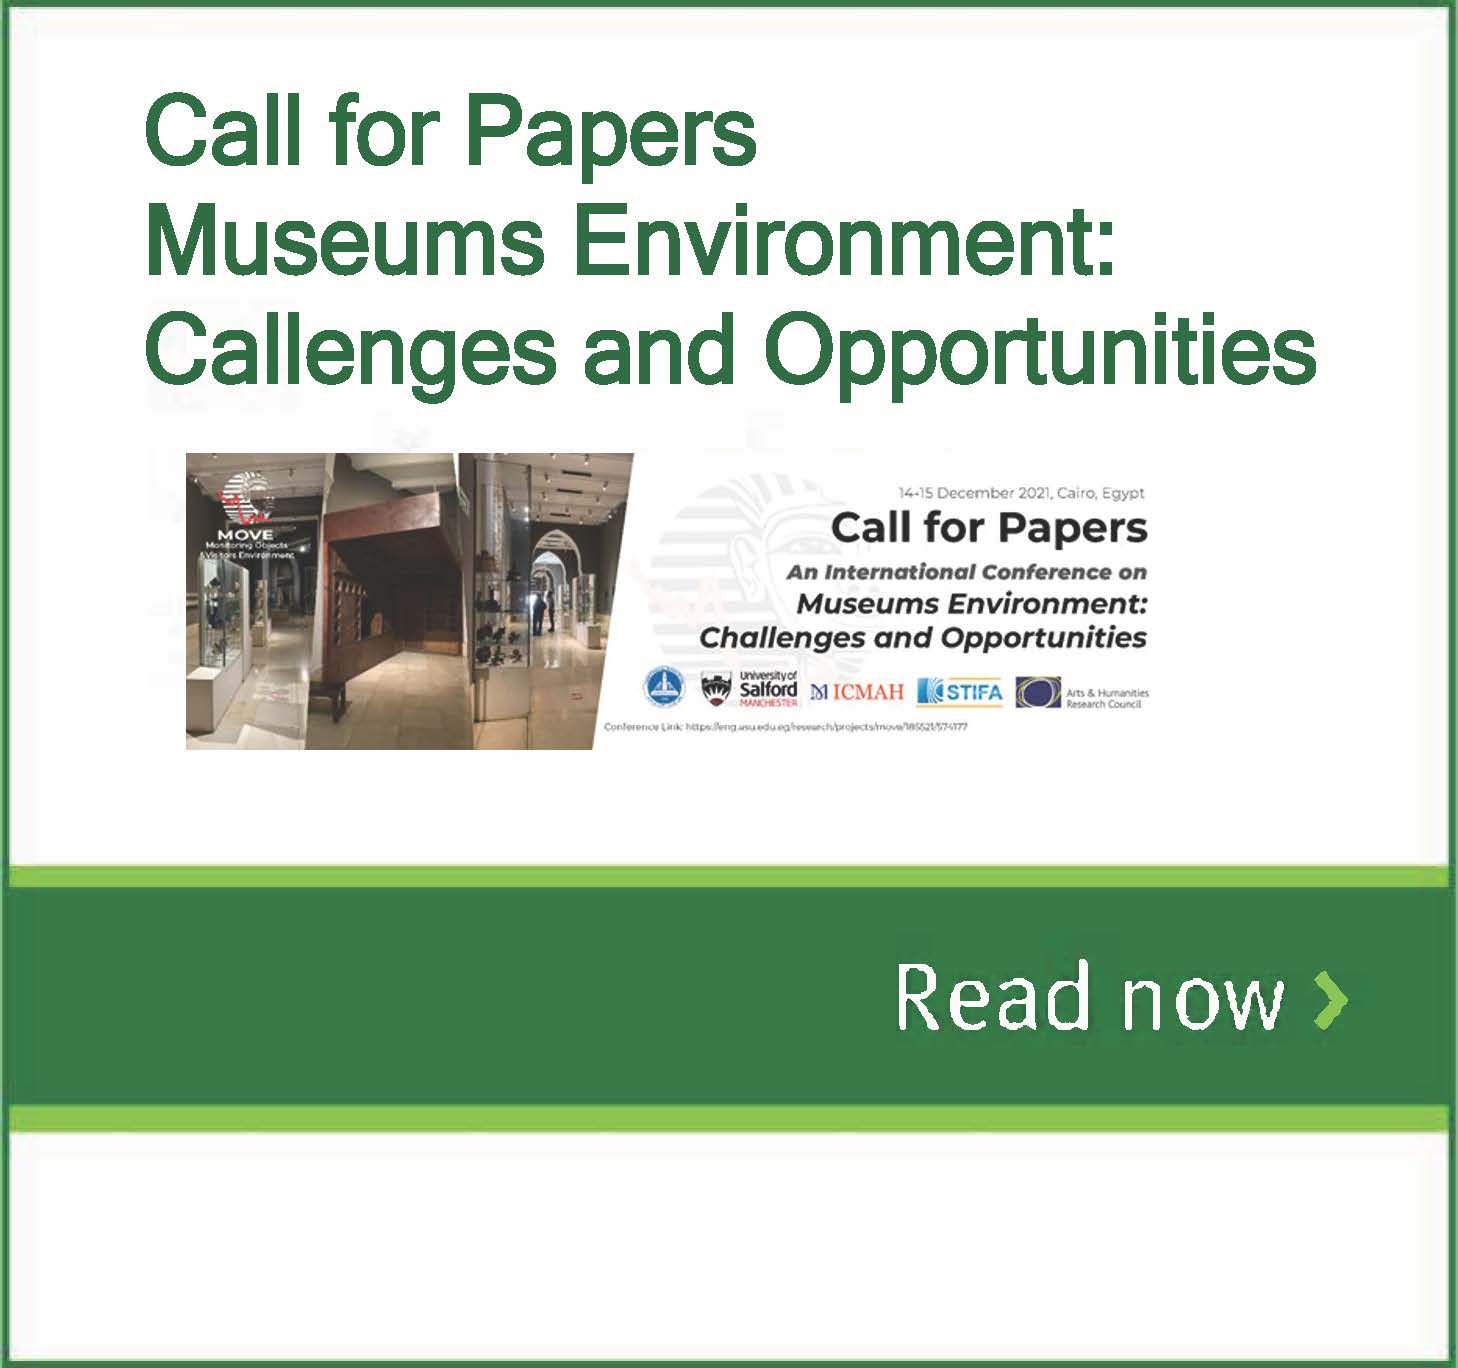 Museums Environment: Challenges and Opportunities